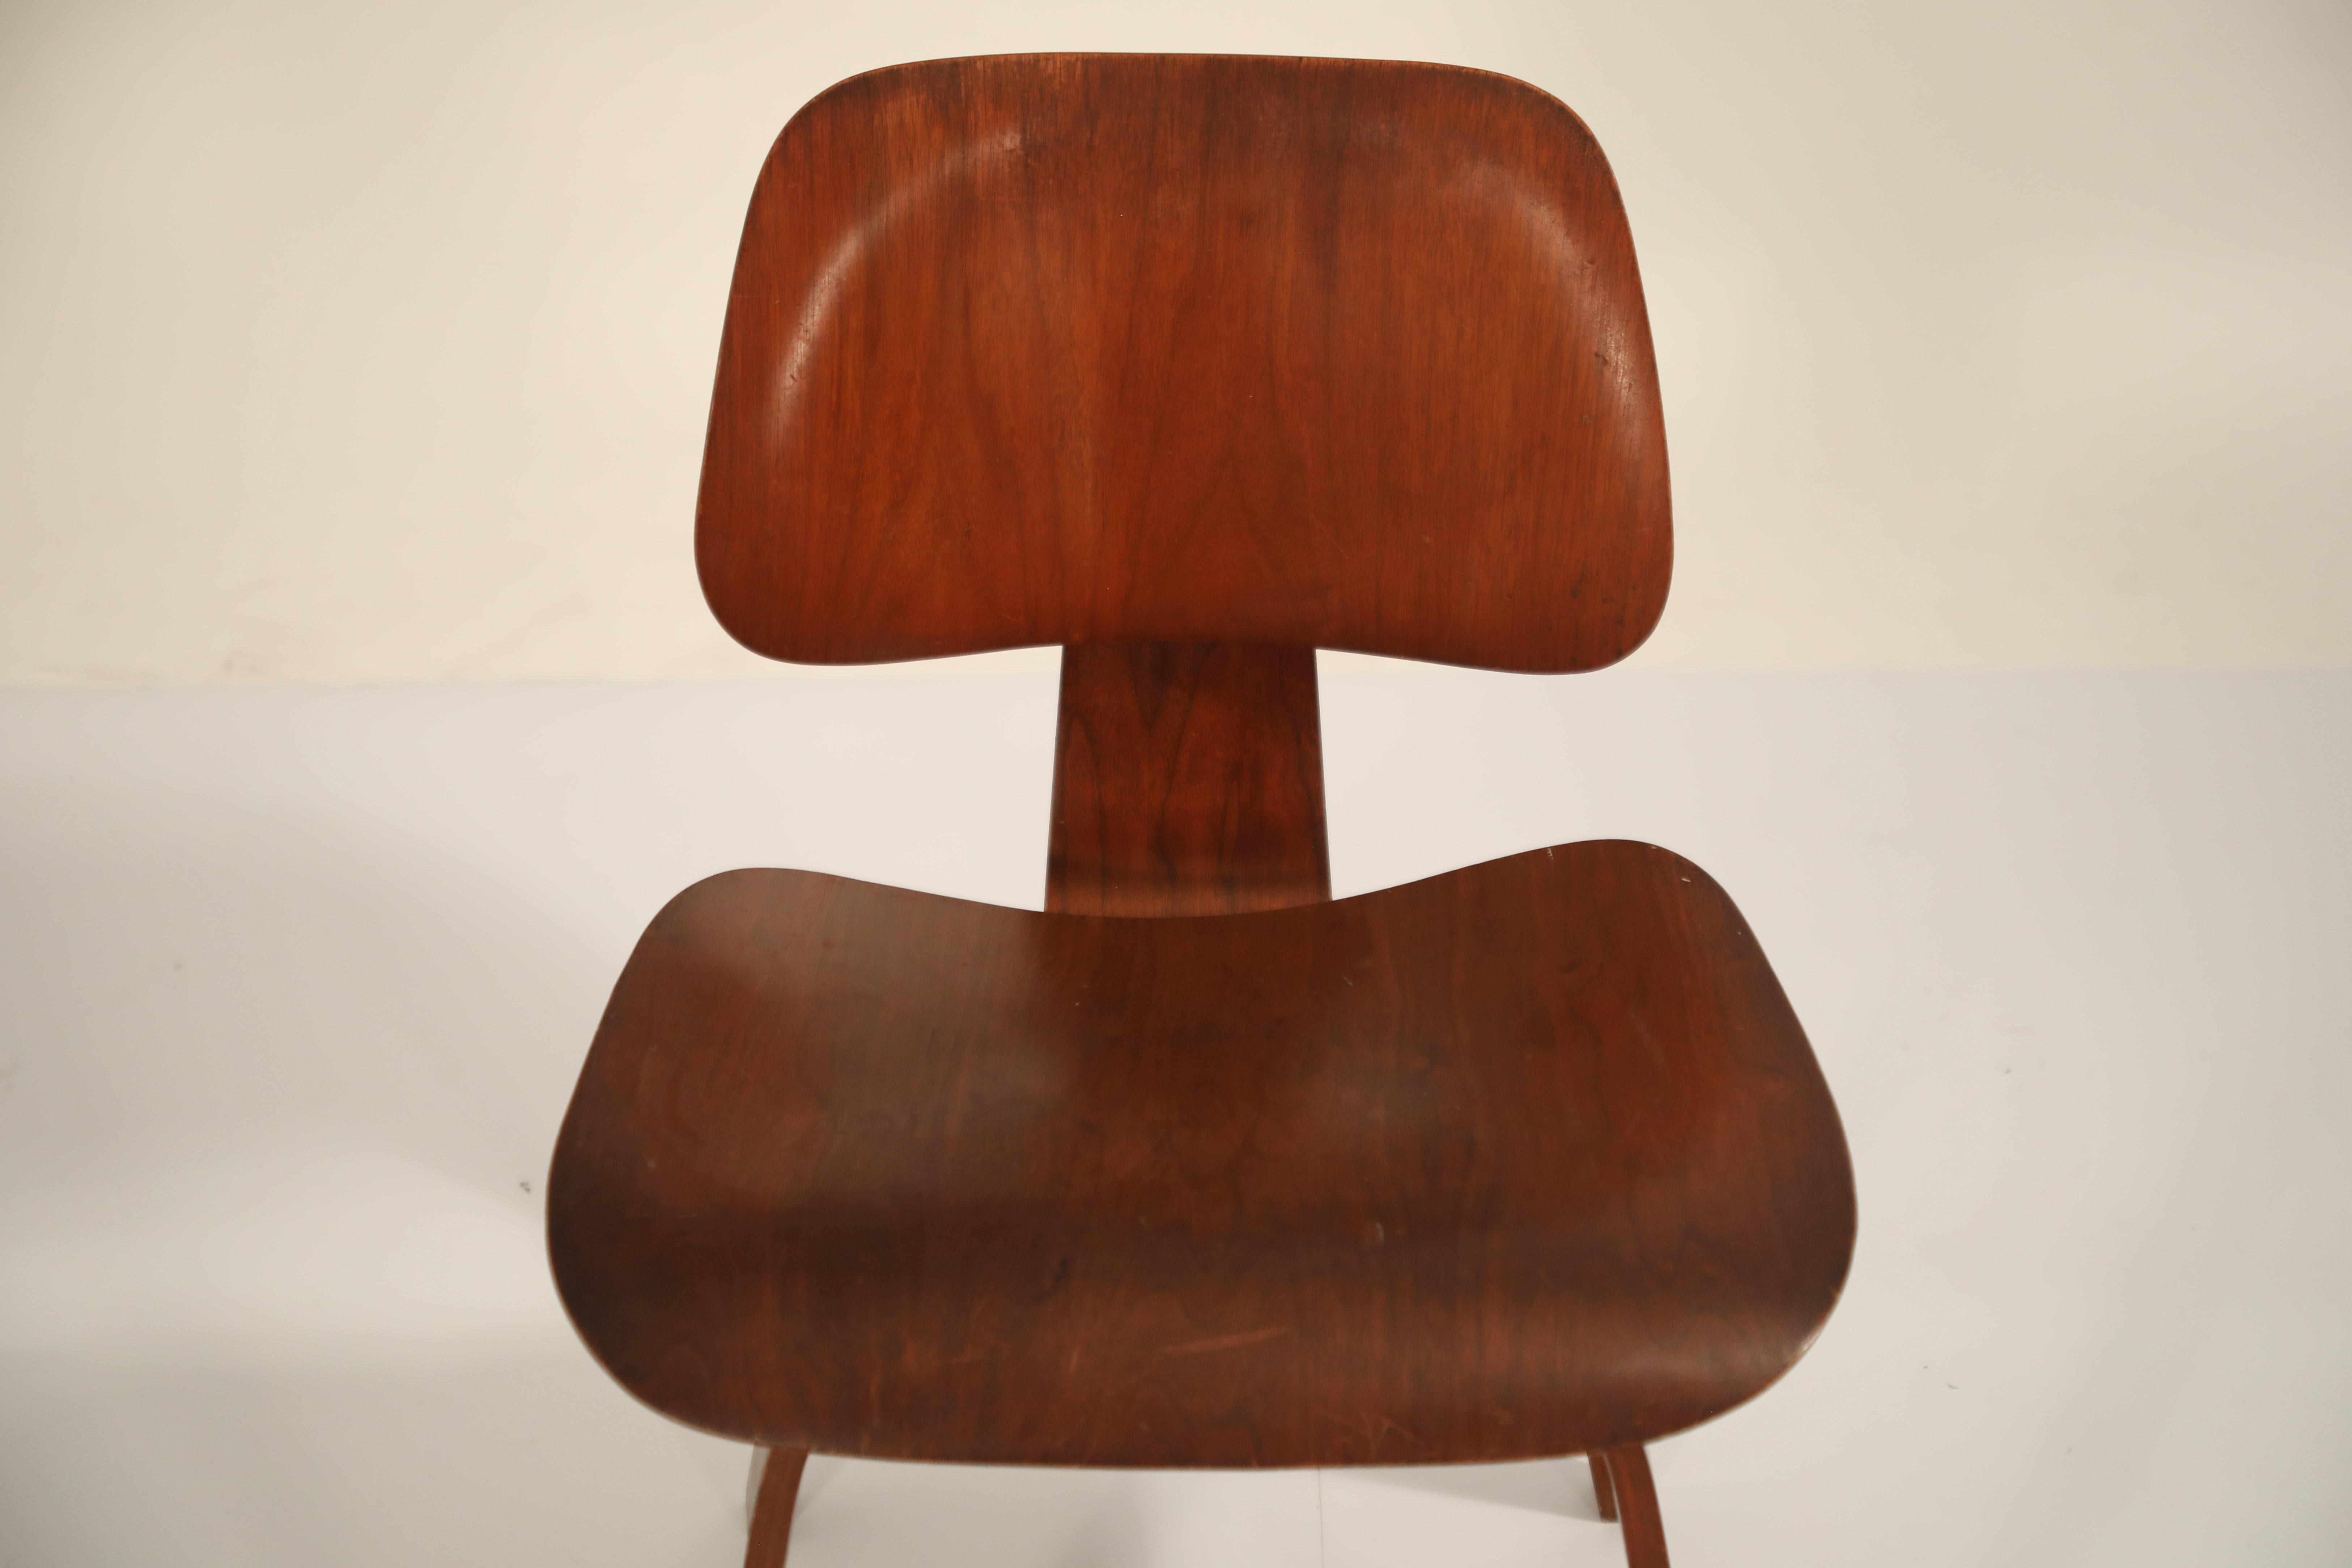 1st Generation Charles Eames for Evans Products Company DCW Chair, 1947, Signed 3